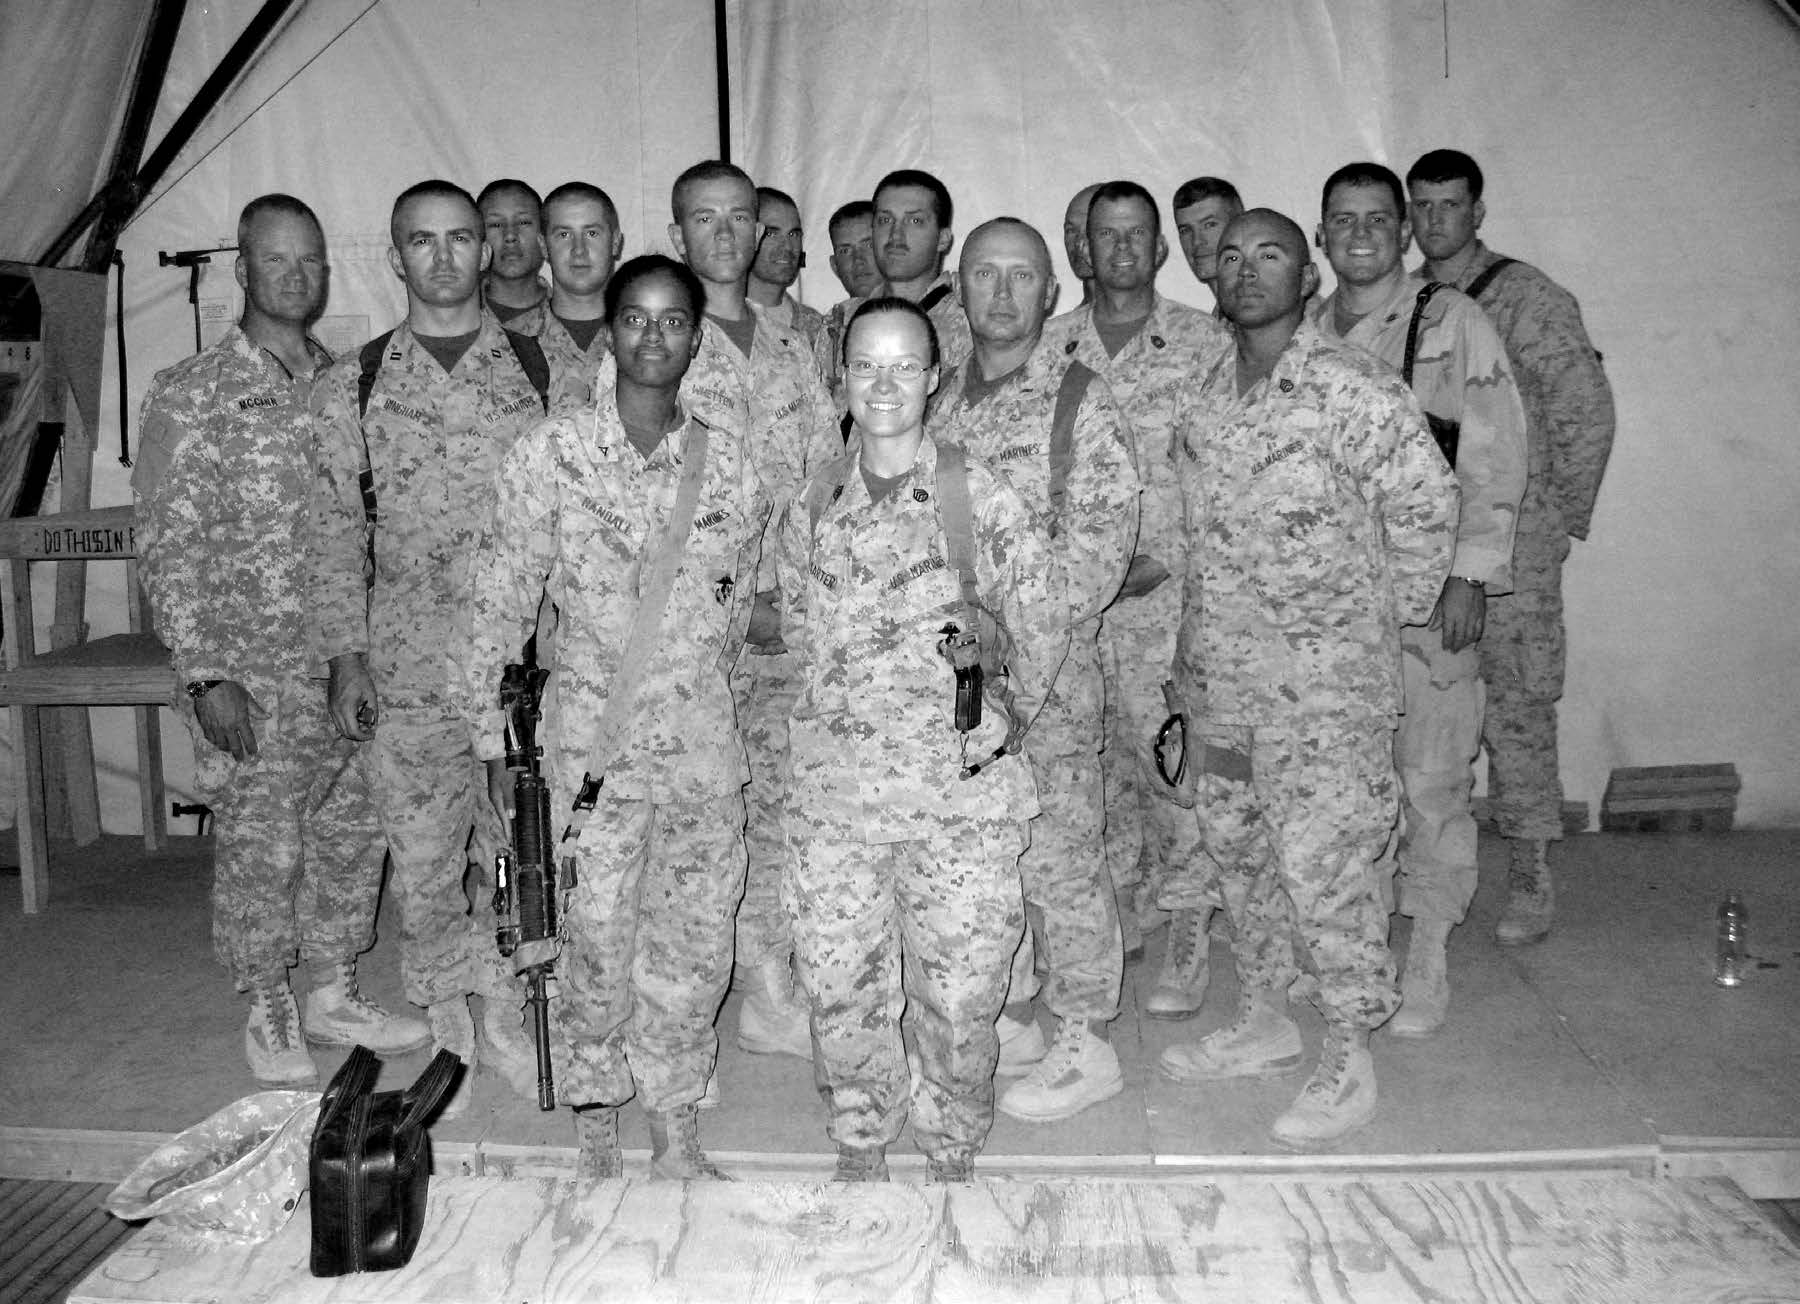 Members of the Leatherneck Military Branch in Helmand Province, Afghanistan, on July 26, 2009. Courtesy of Eugene J. Wikle.